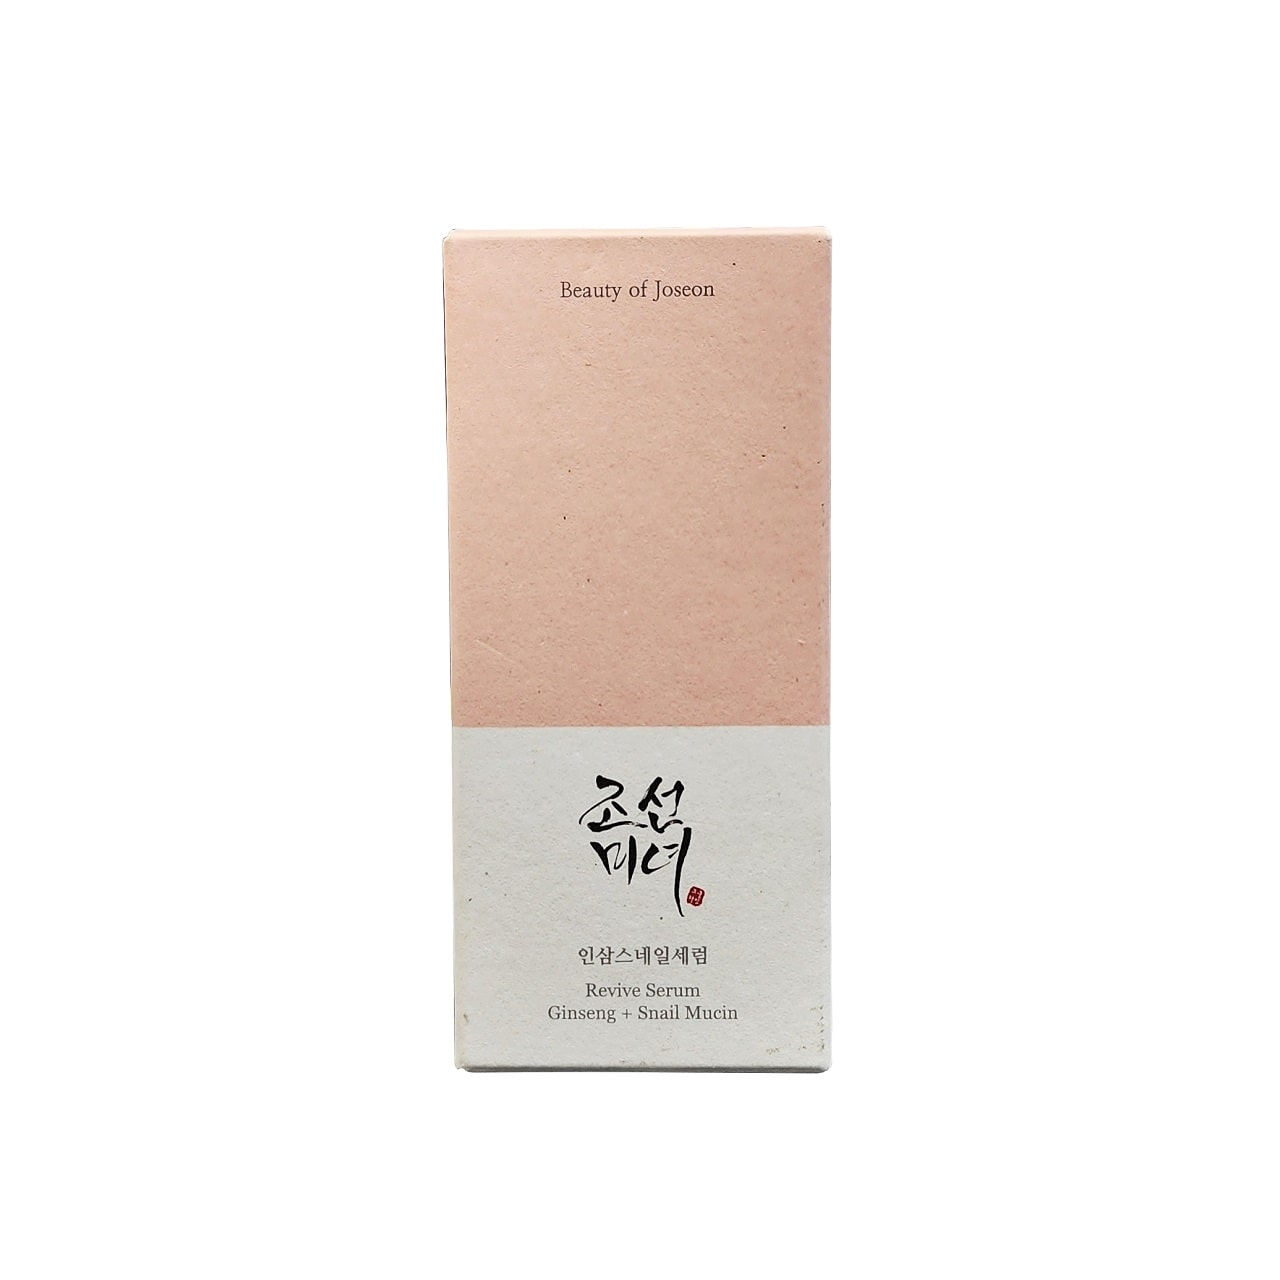 Product label for Beauty of Joseon Revive Serum Ginseng + Snail Mucin (30 mL)